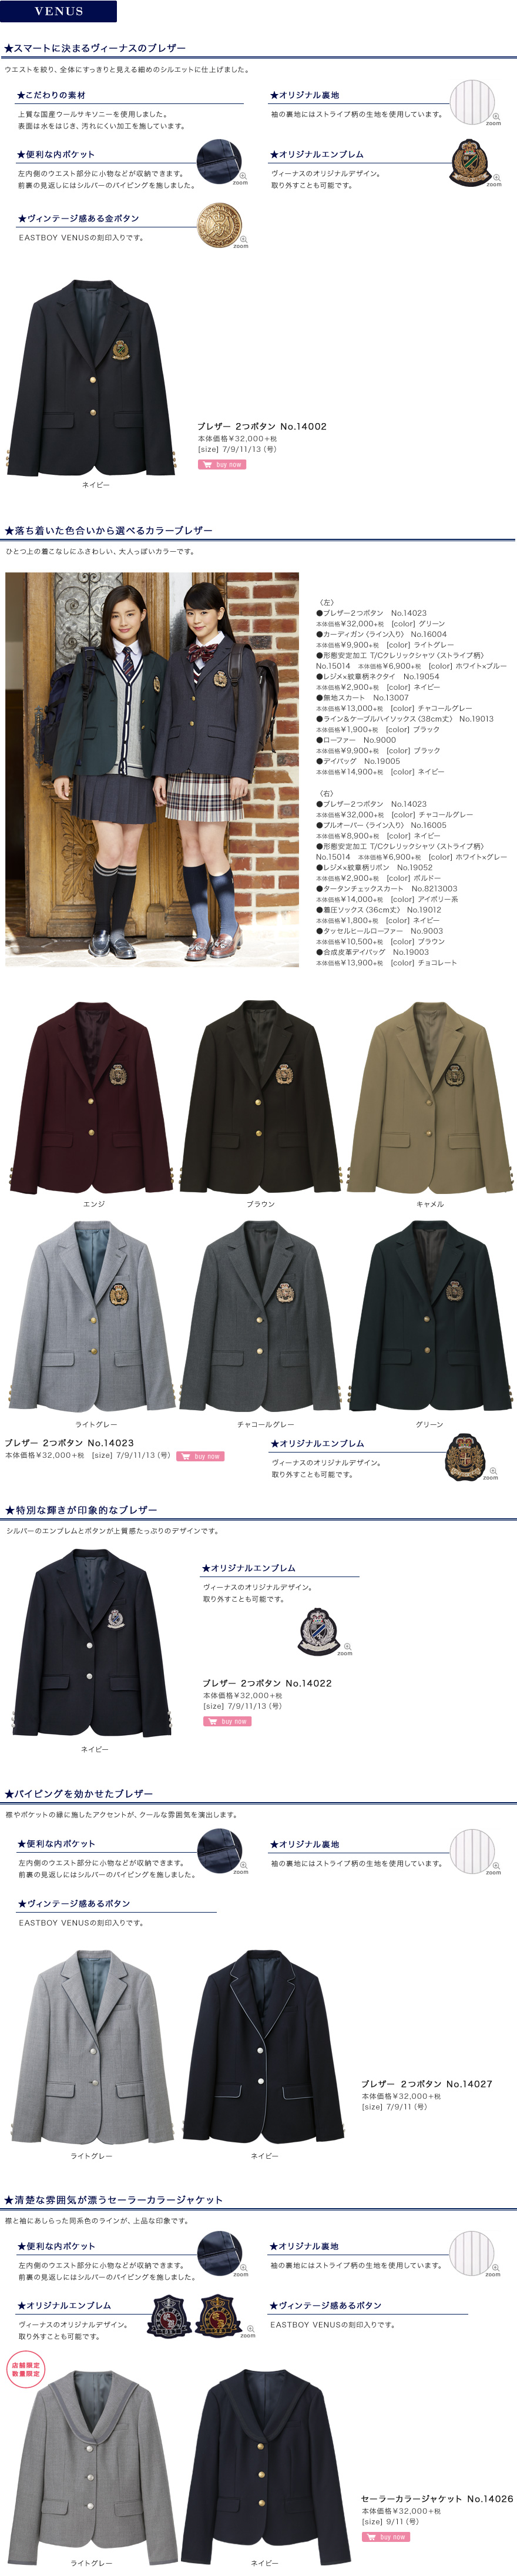 Blazer：季節のスクールアイテム｜EASTBOY Official Web Site